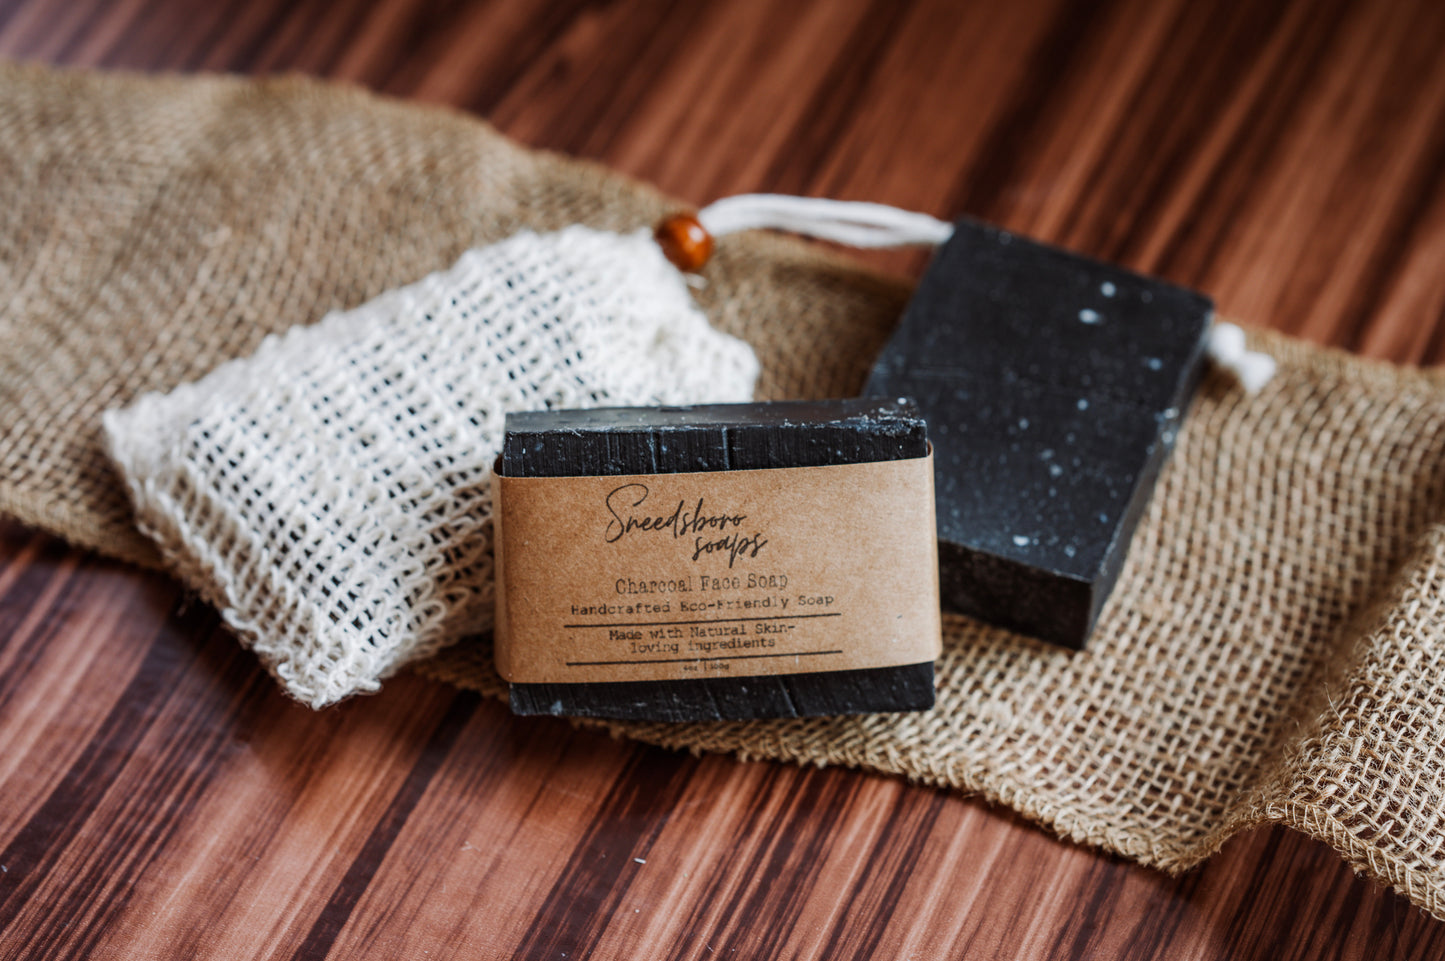 Charcoal Tea Tree Face and Body Soap